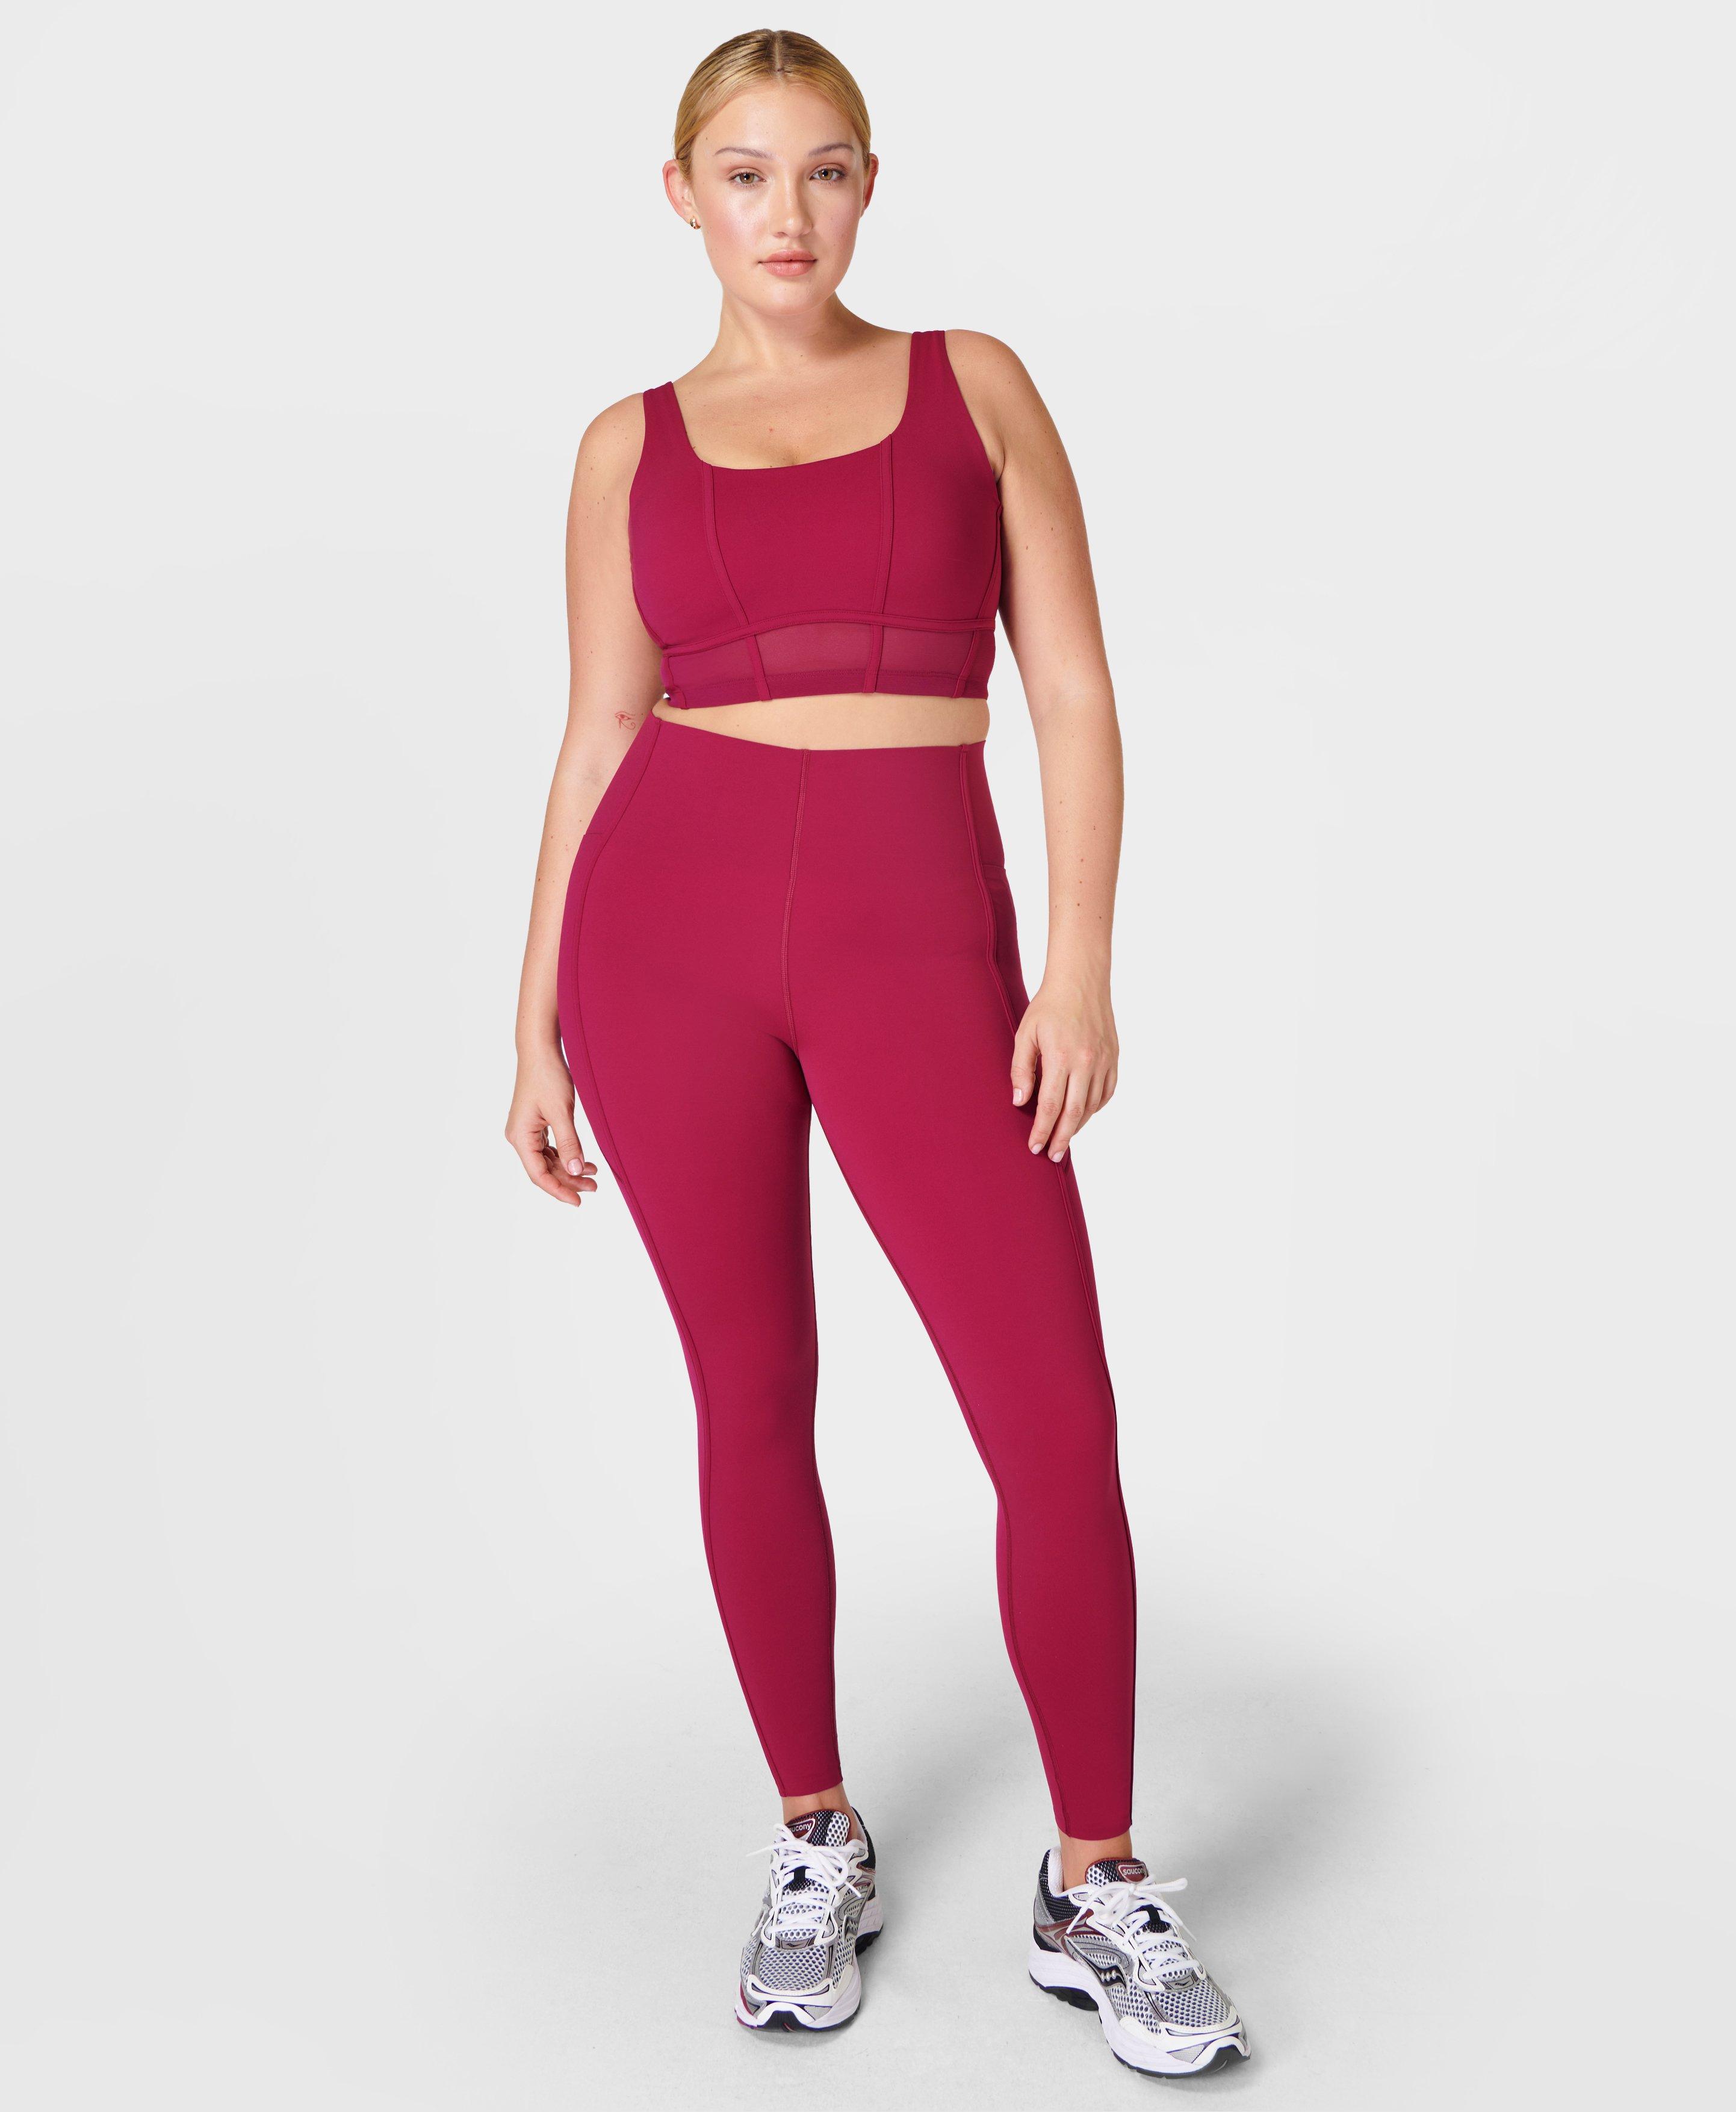 Flounce London gym legging with bumsculpt in red